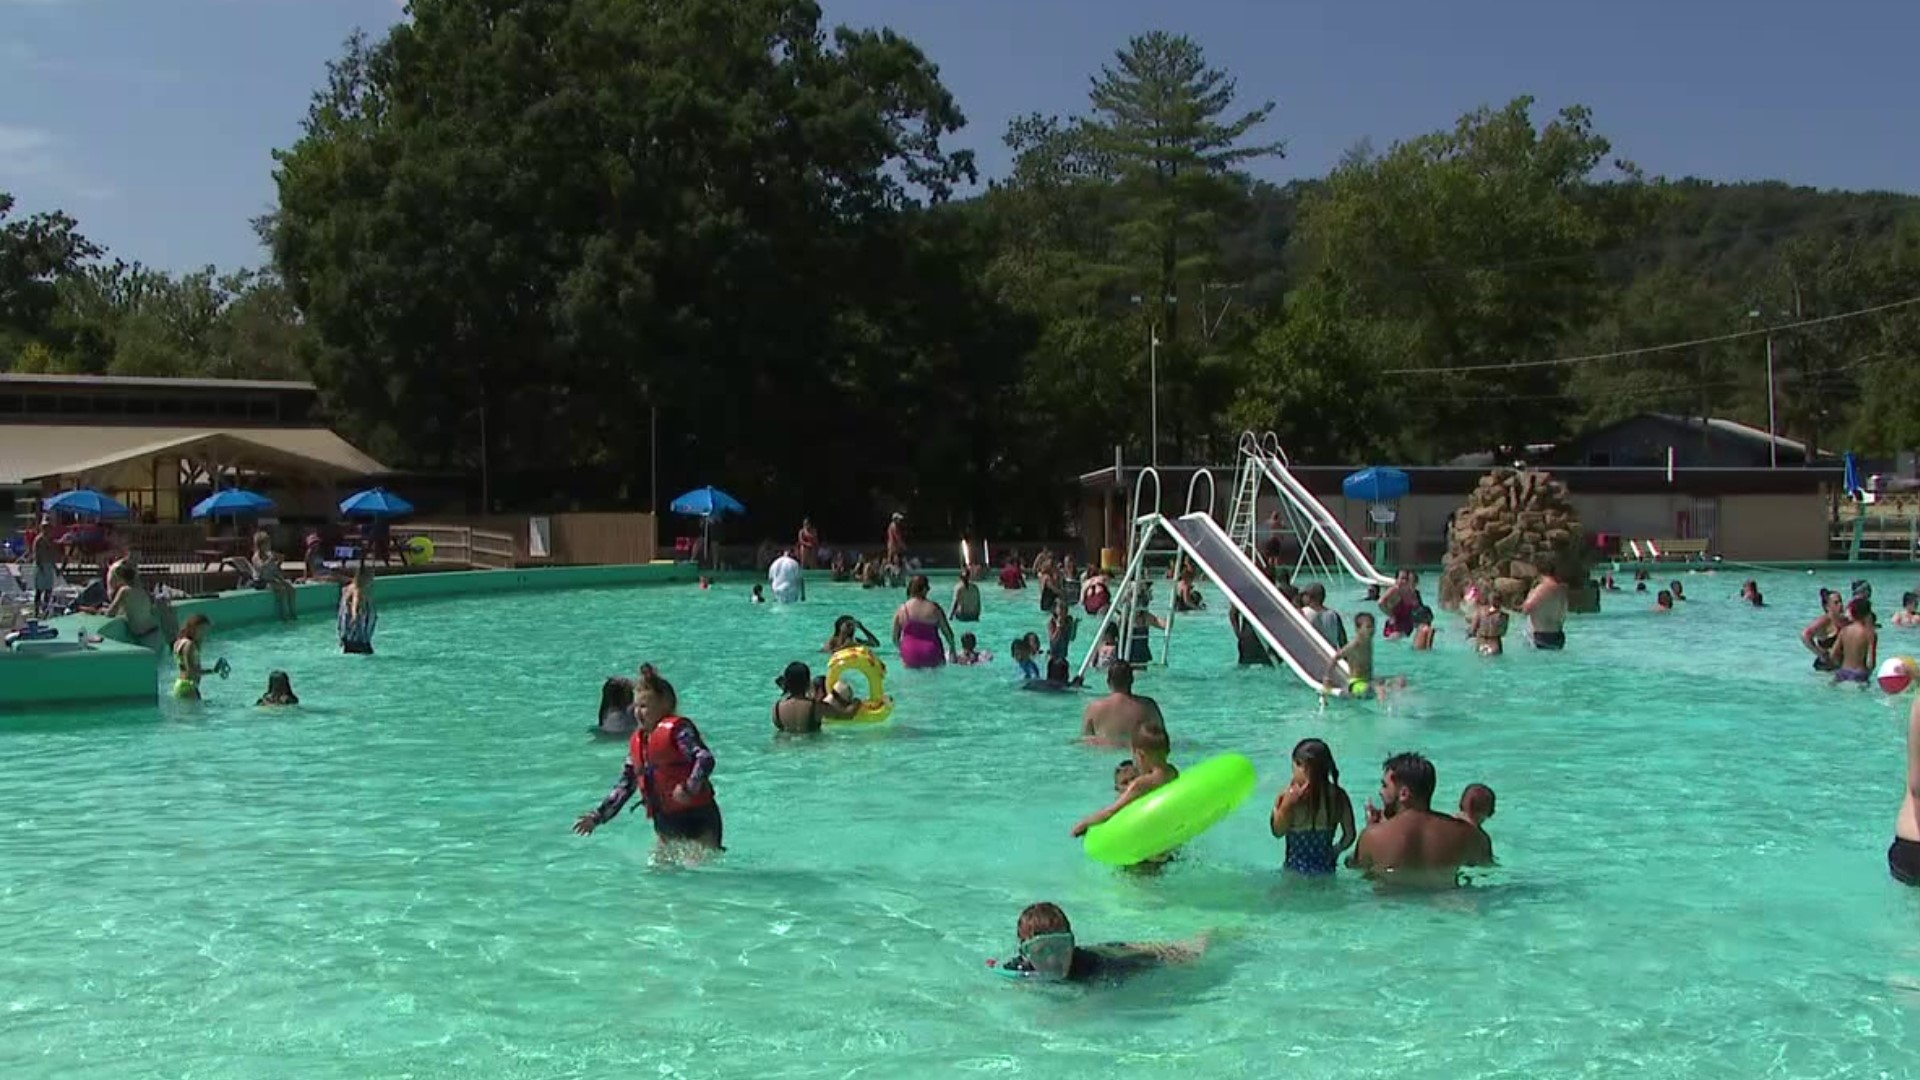 It was a hot one out there and many people decided to beat the heat at the pool at Knoebels Amusement Resort.